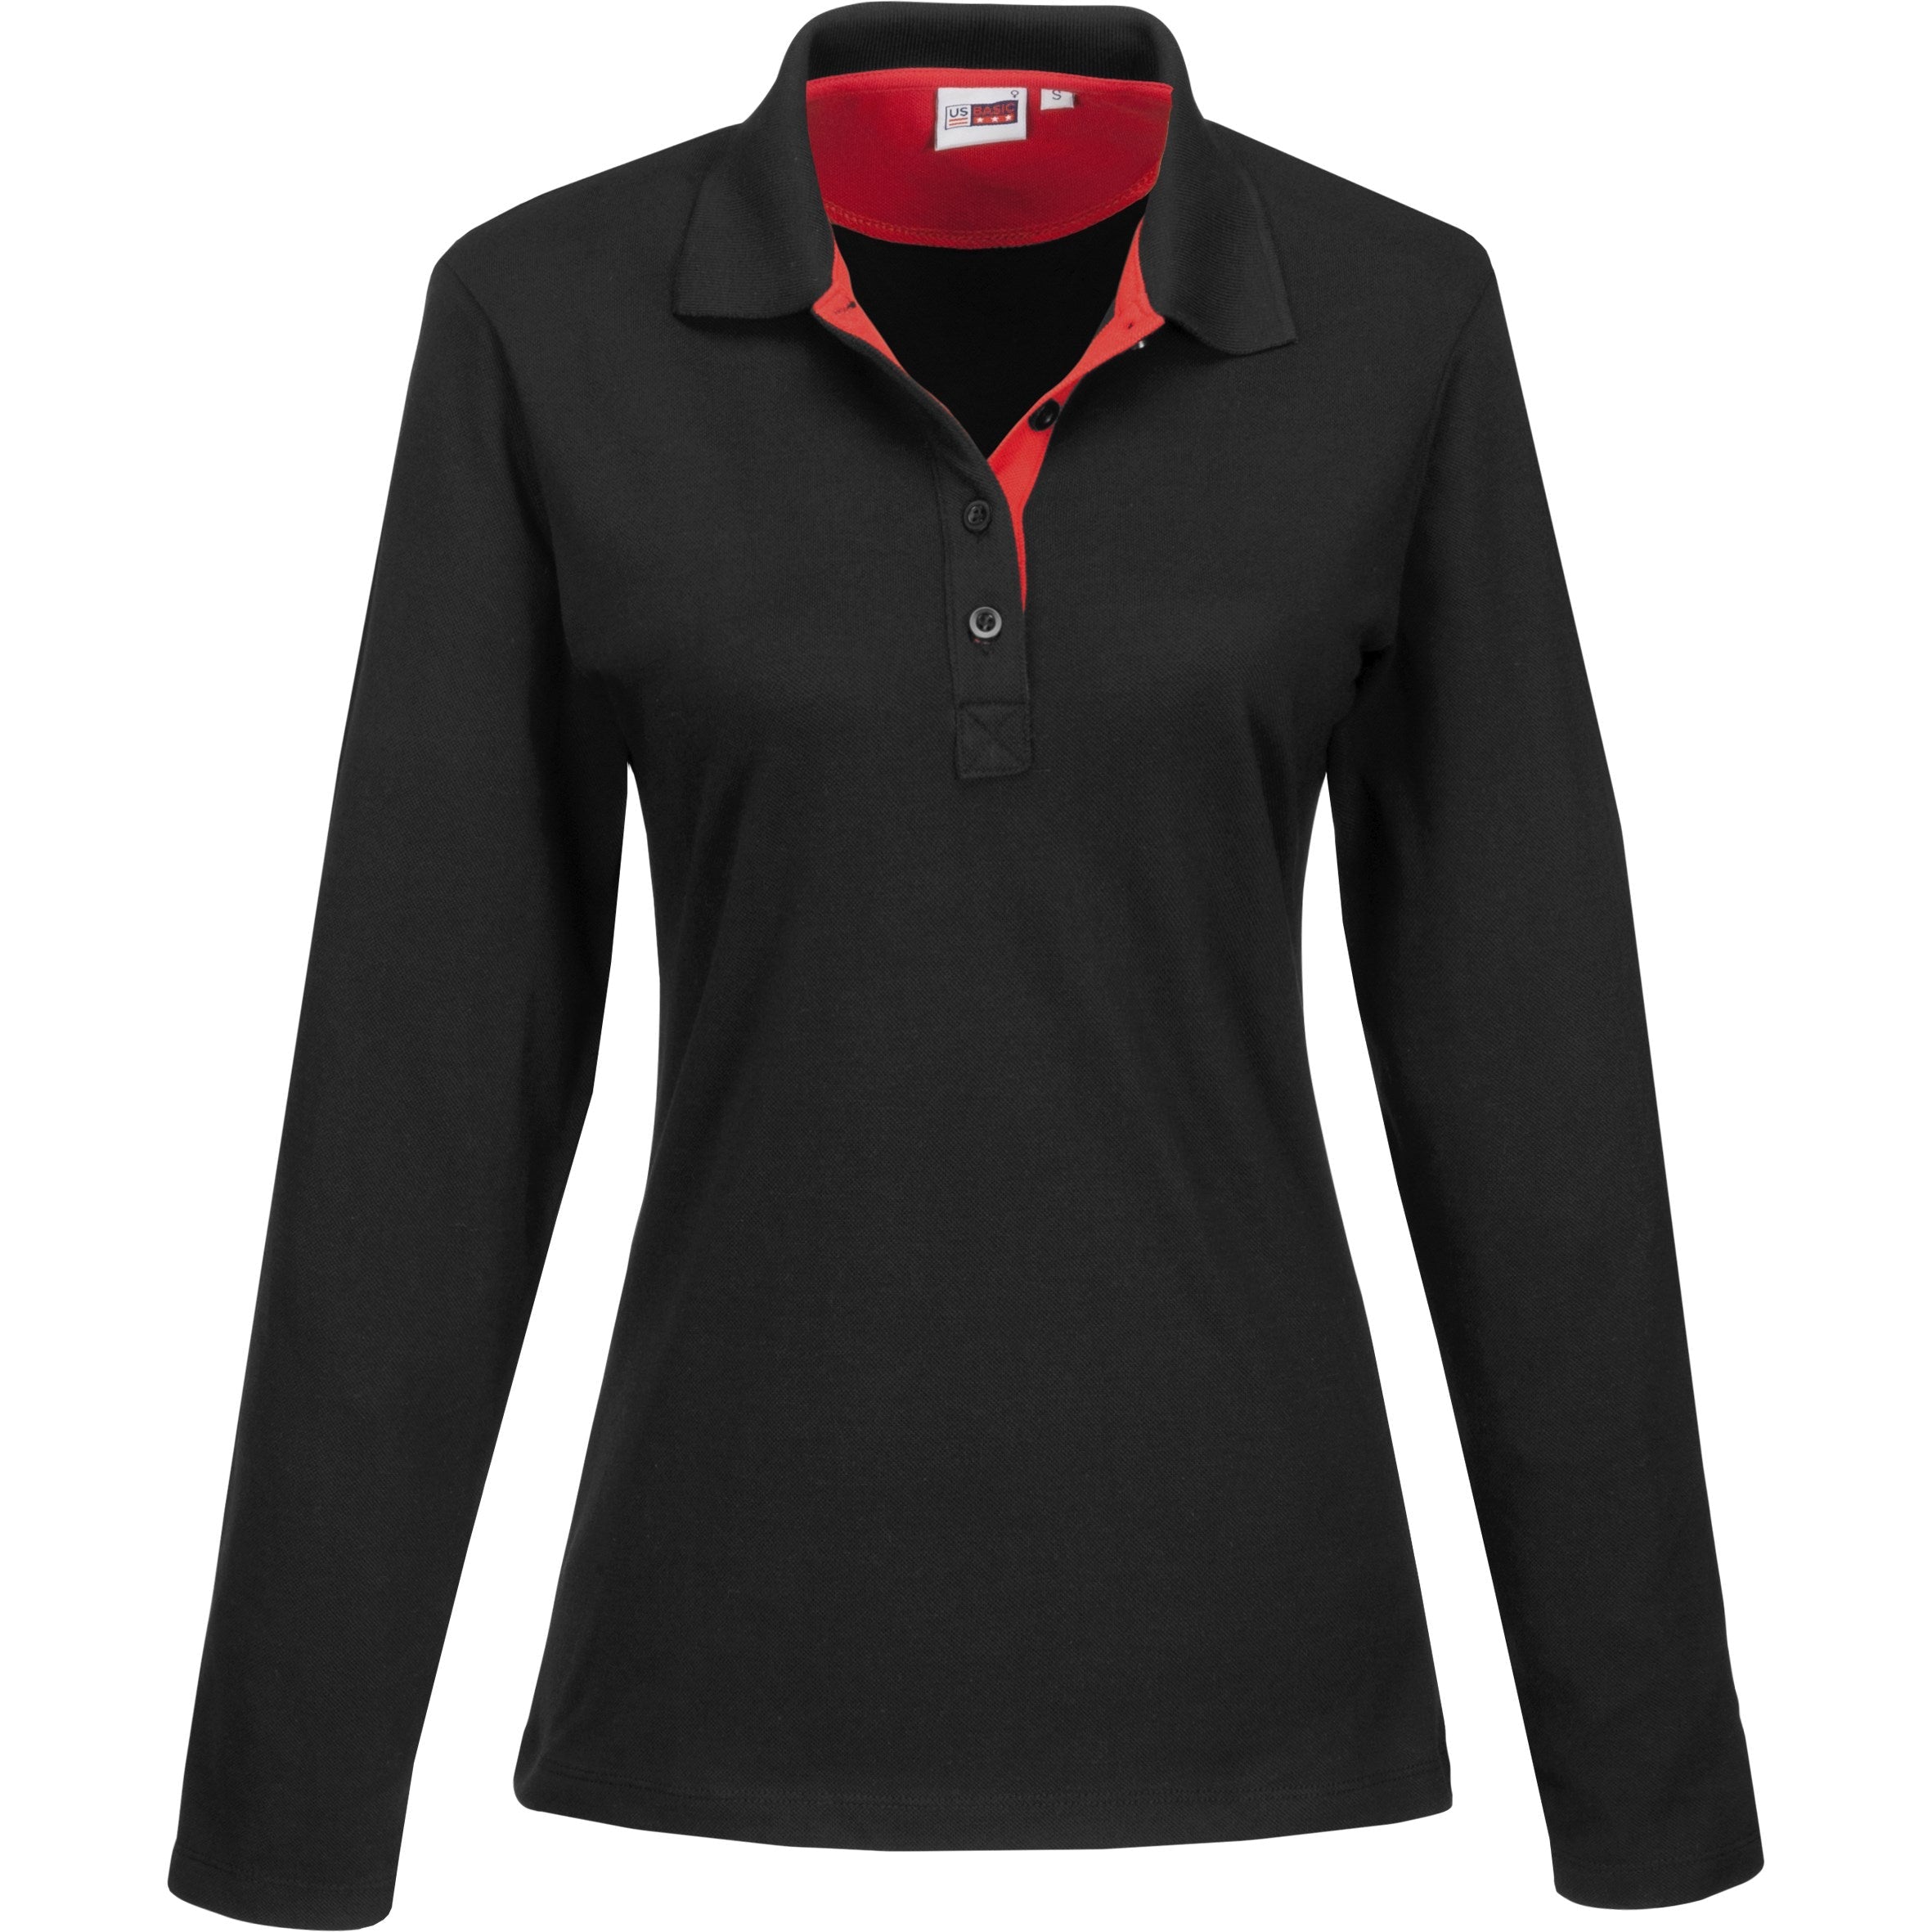 Ladies Long Sleeve Solo Golf Shirt - Orange Only-2XL-Red-R